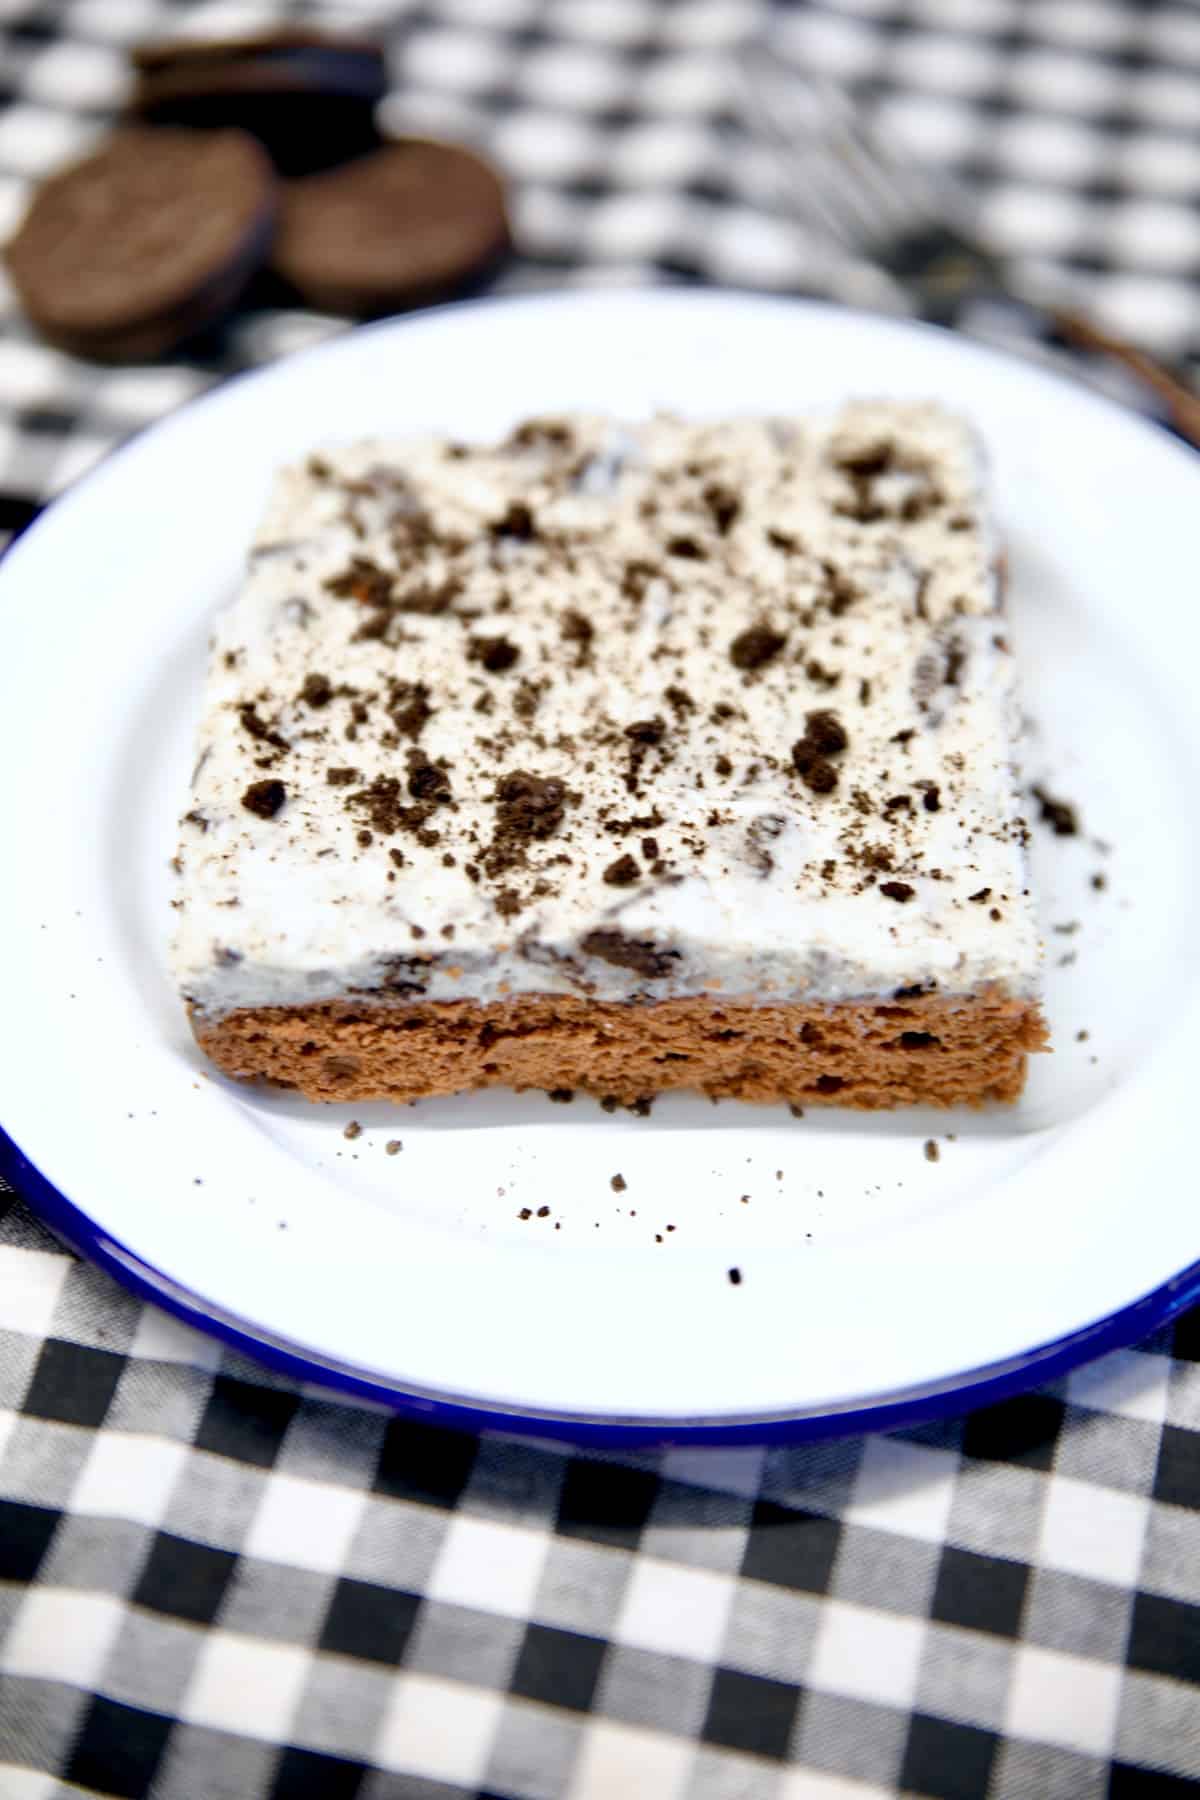 Slice of chocolate cake with cookies and cream icing on a plate.